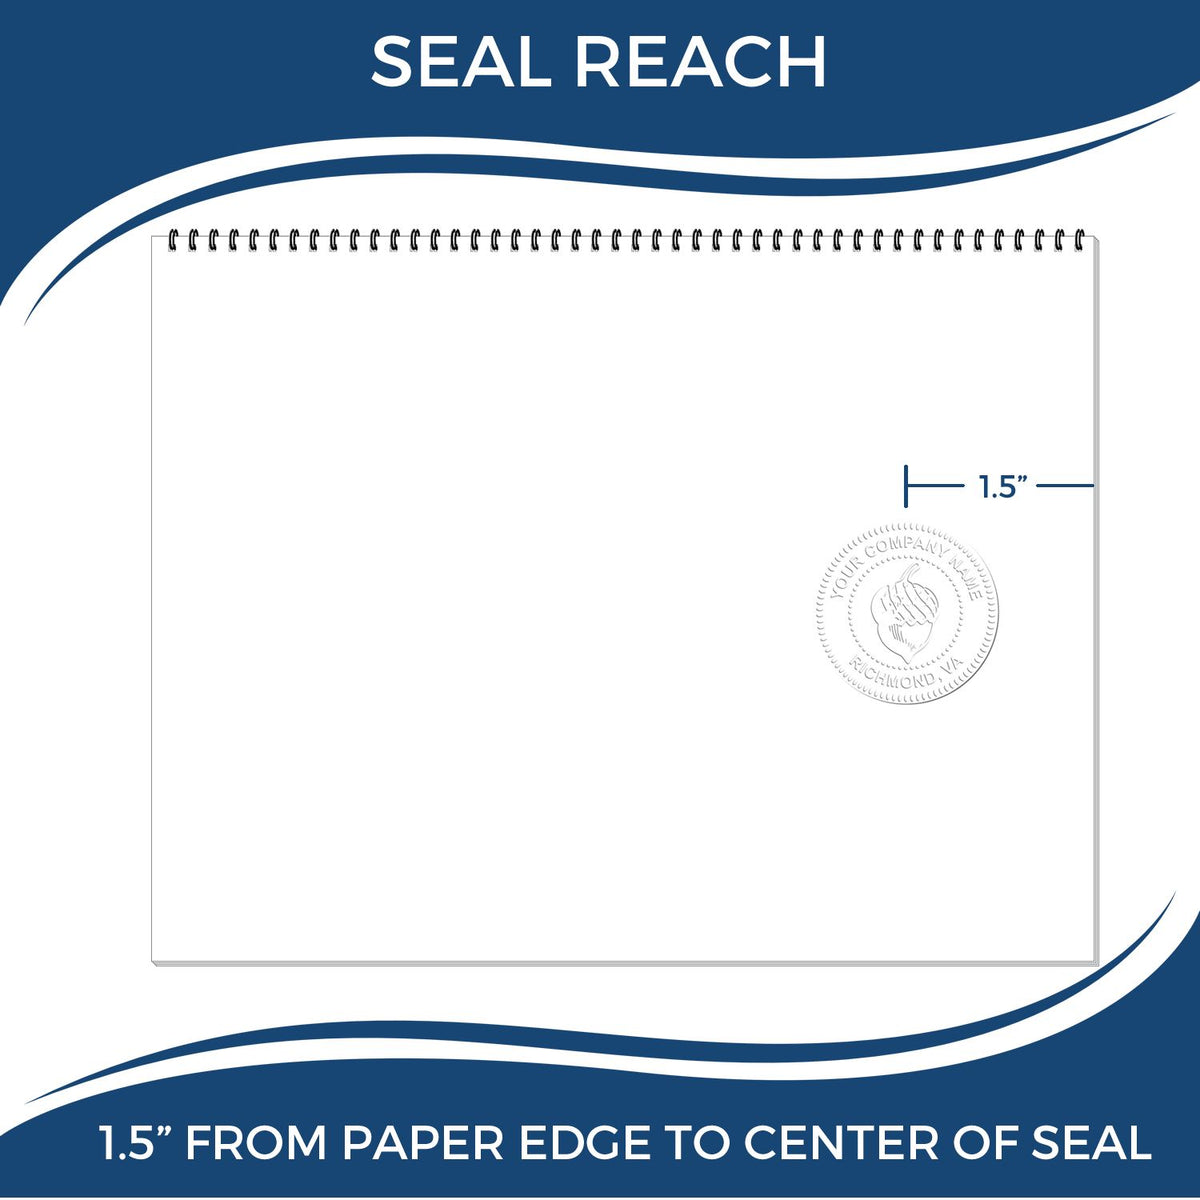 An infographic showing the seal reach which is represented by a ruler and a miniature seal image of the Arkansas Desk Surveyor Seal Embosser